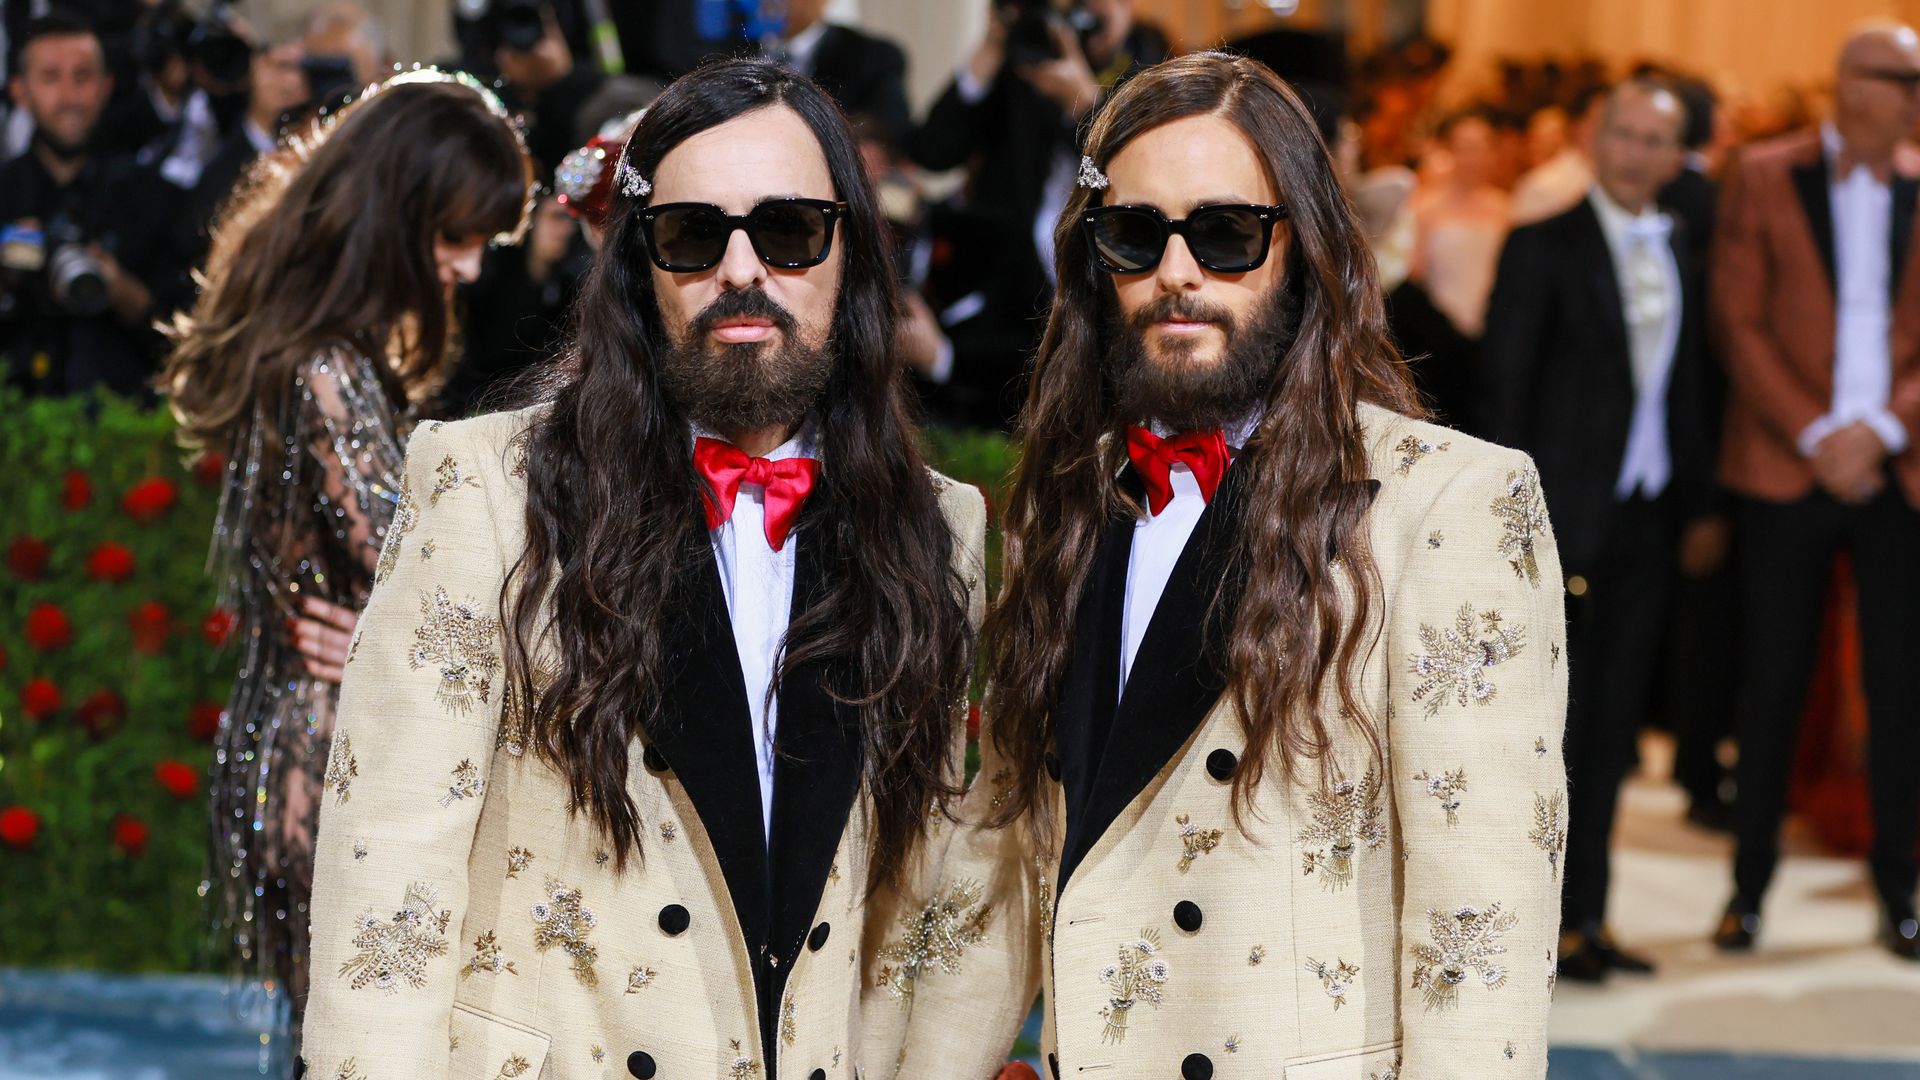 Alessandro Michele named as Creative Director of Valentino